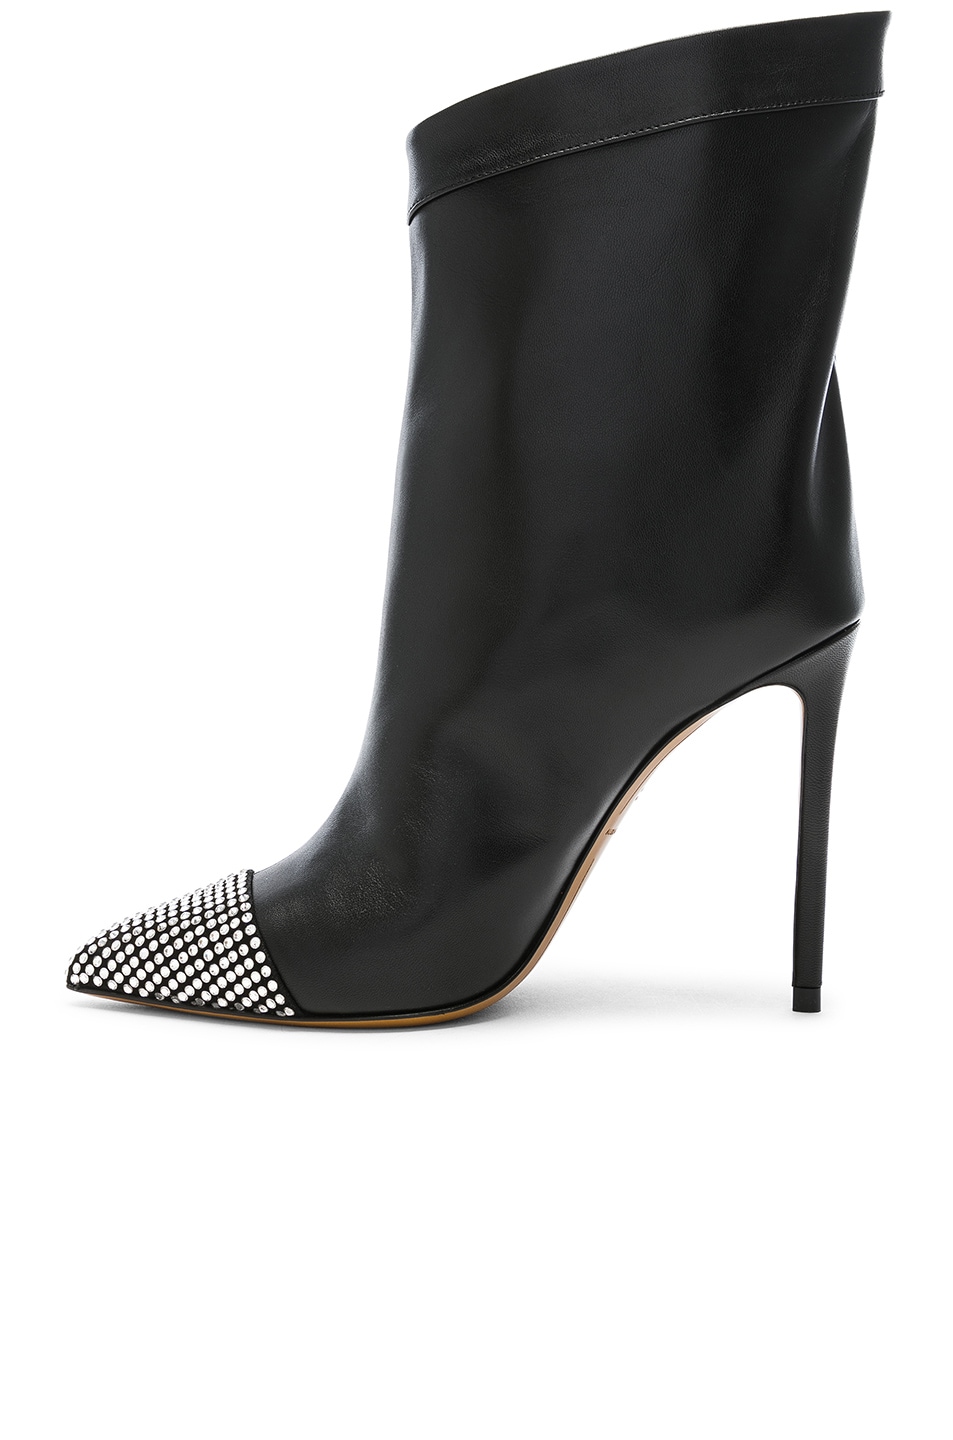 Alexandre Vauthier Leather Cha Cha Booties in Black | FWRD